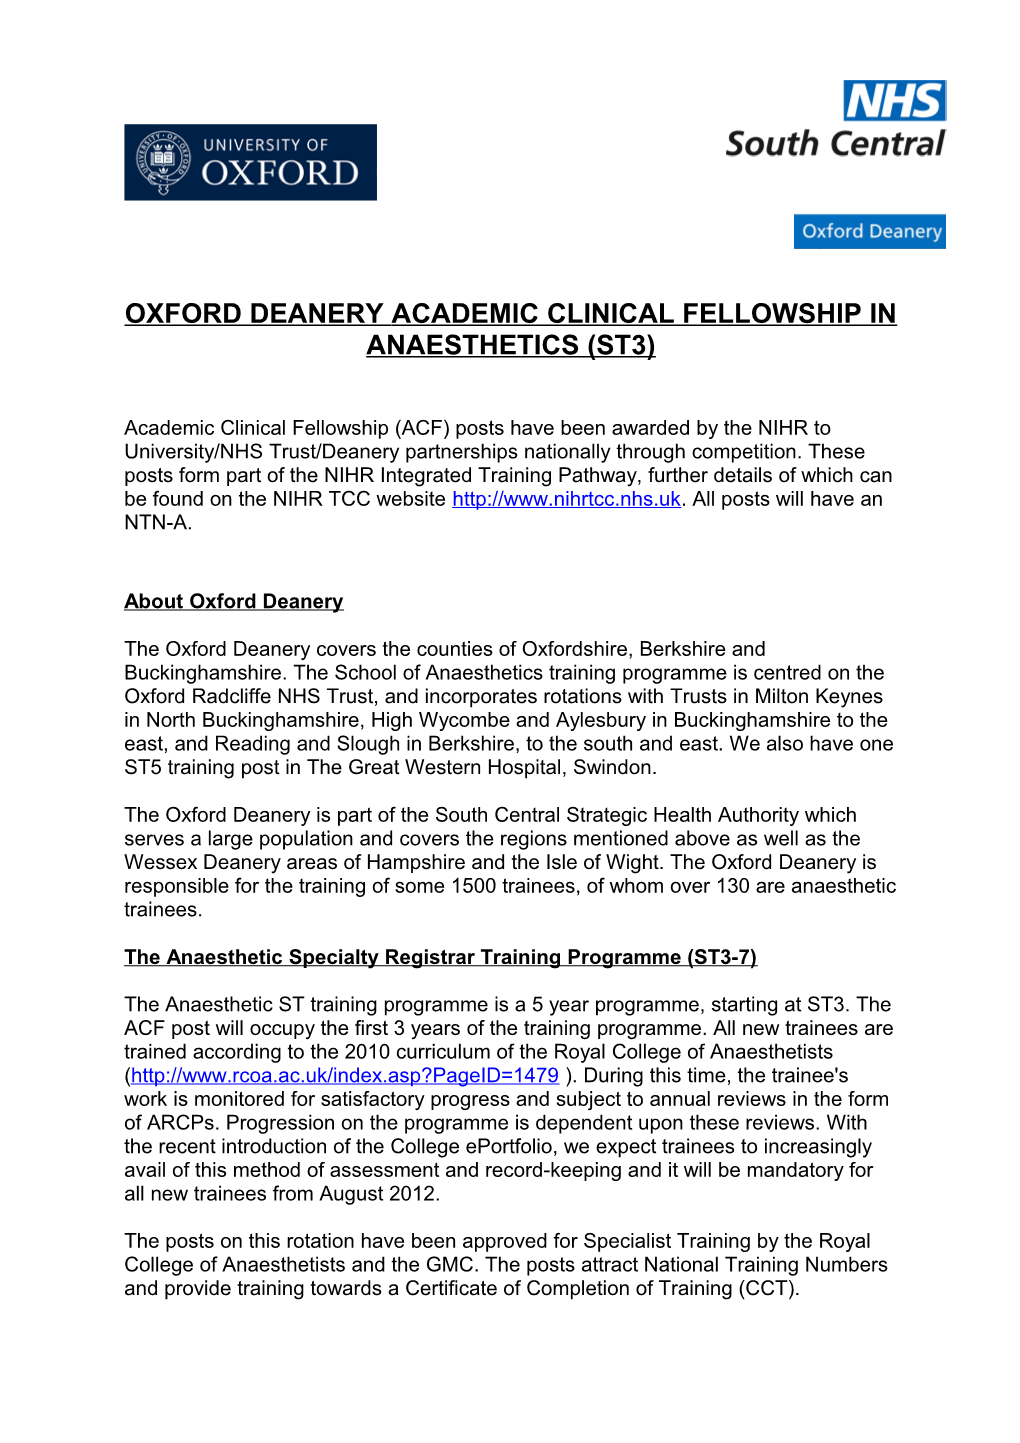 Oxford Deanery Specialty Training Programme in Anaesthesia s1